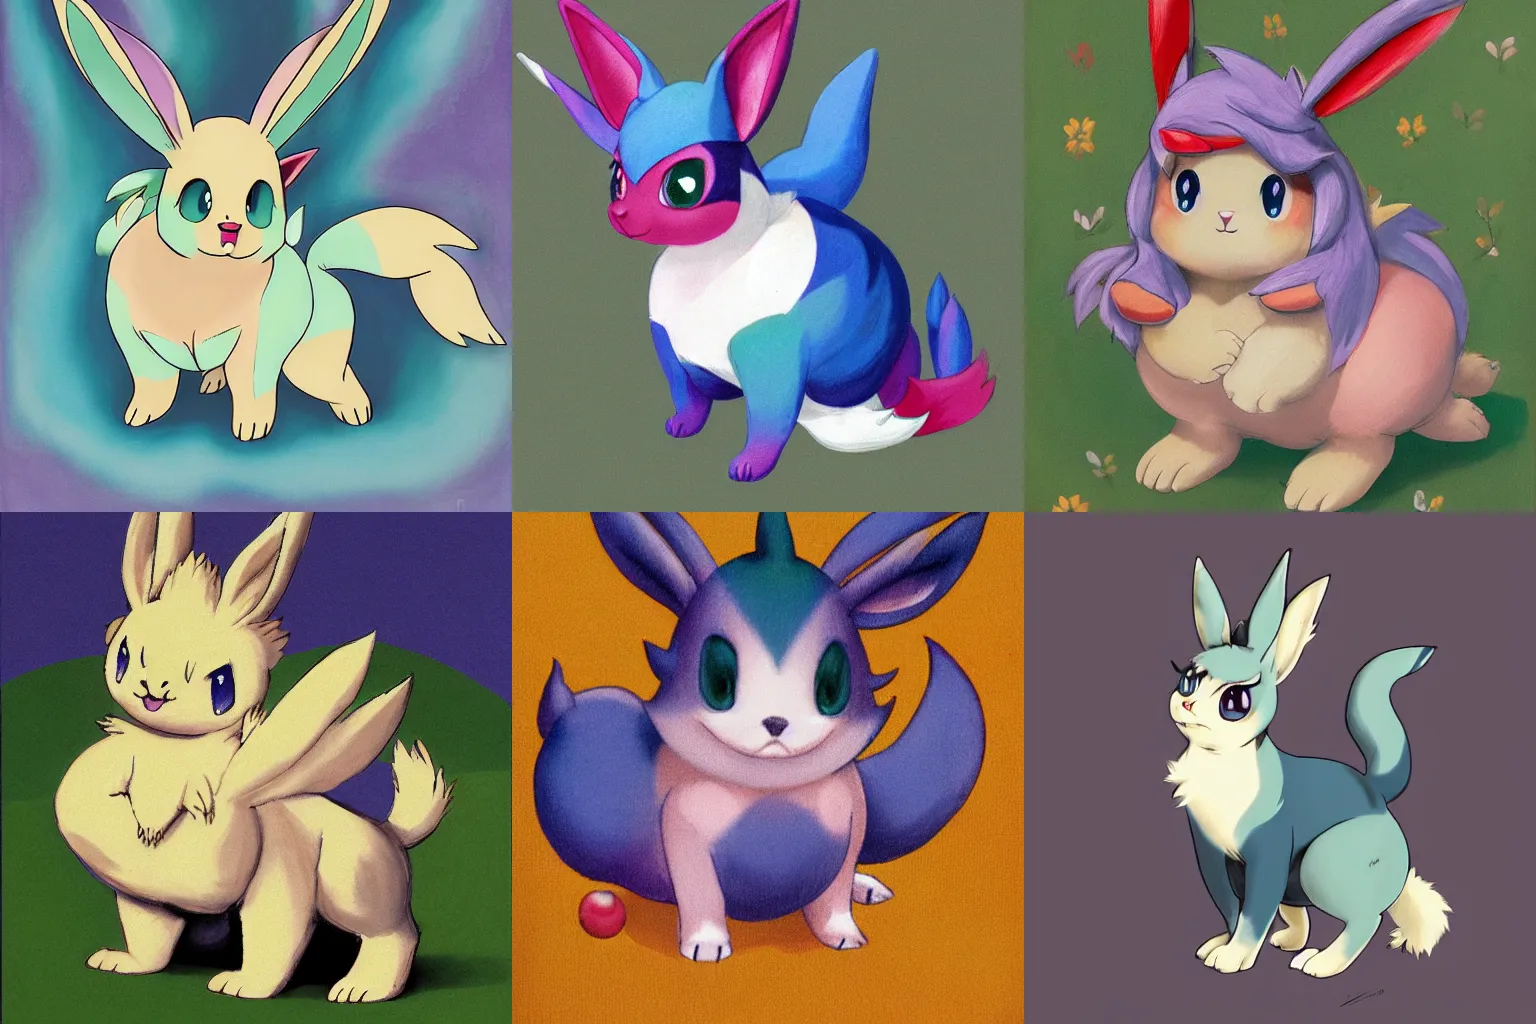 Prompt: chubby eeveelution by louise dahl - wolfe